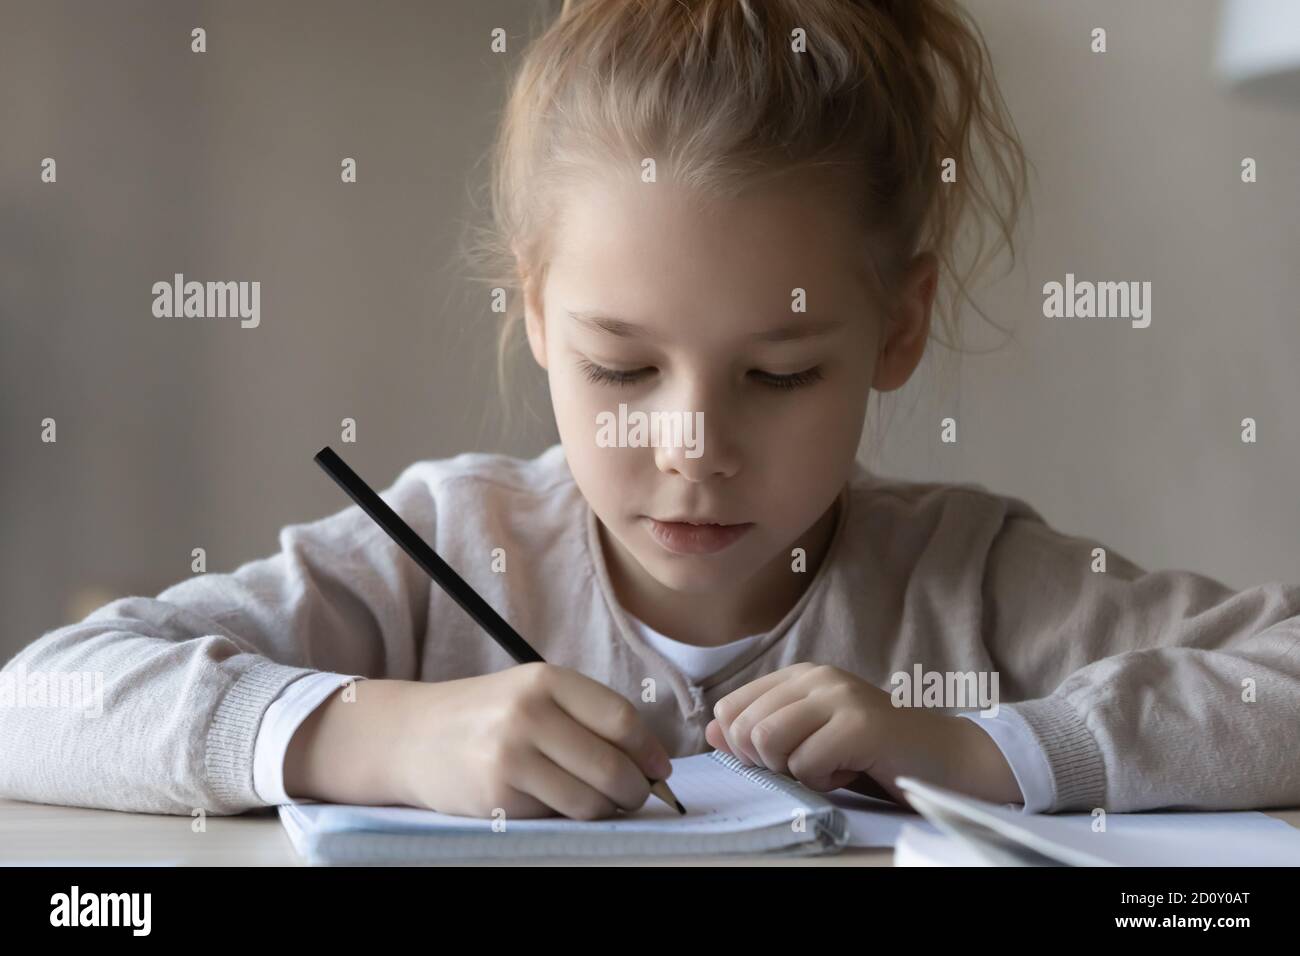 Close up busy focused little girl studying, writing in notebook Stock Photo